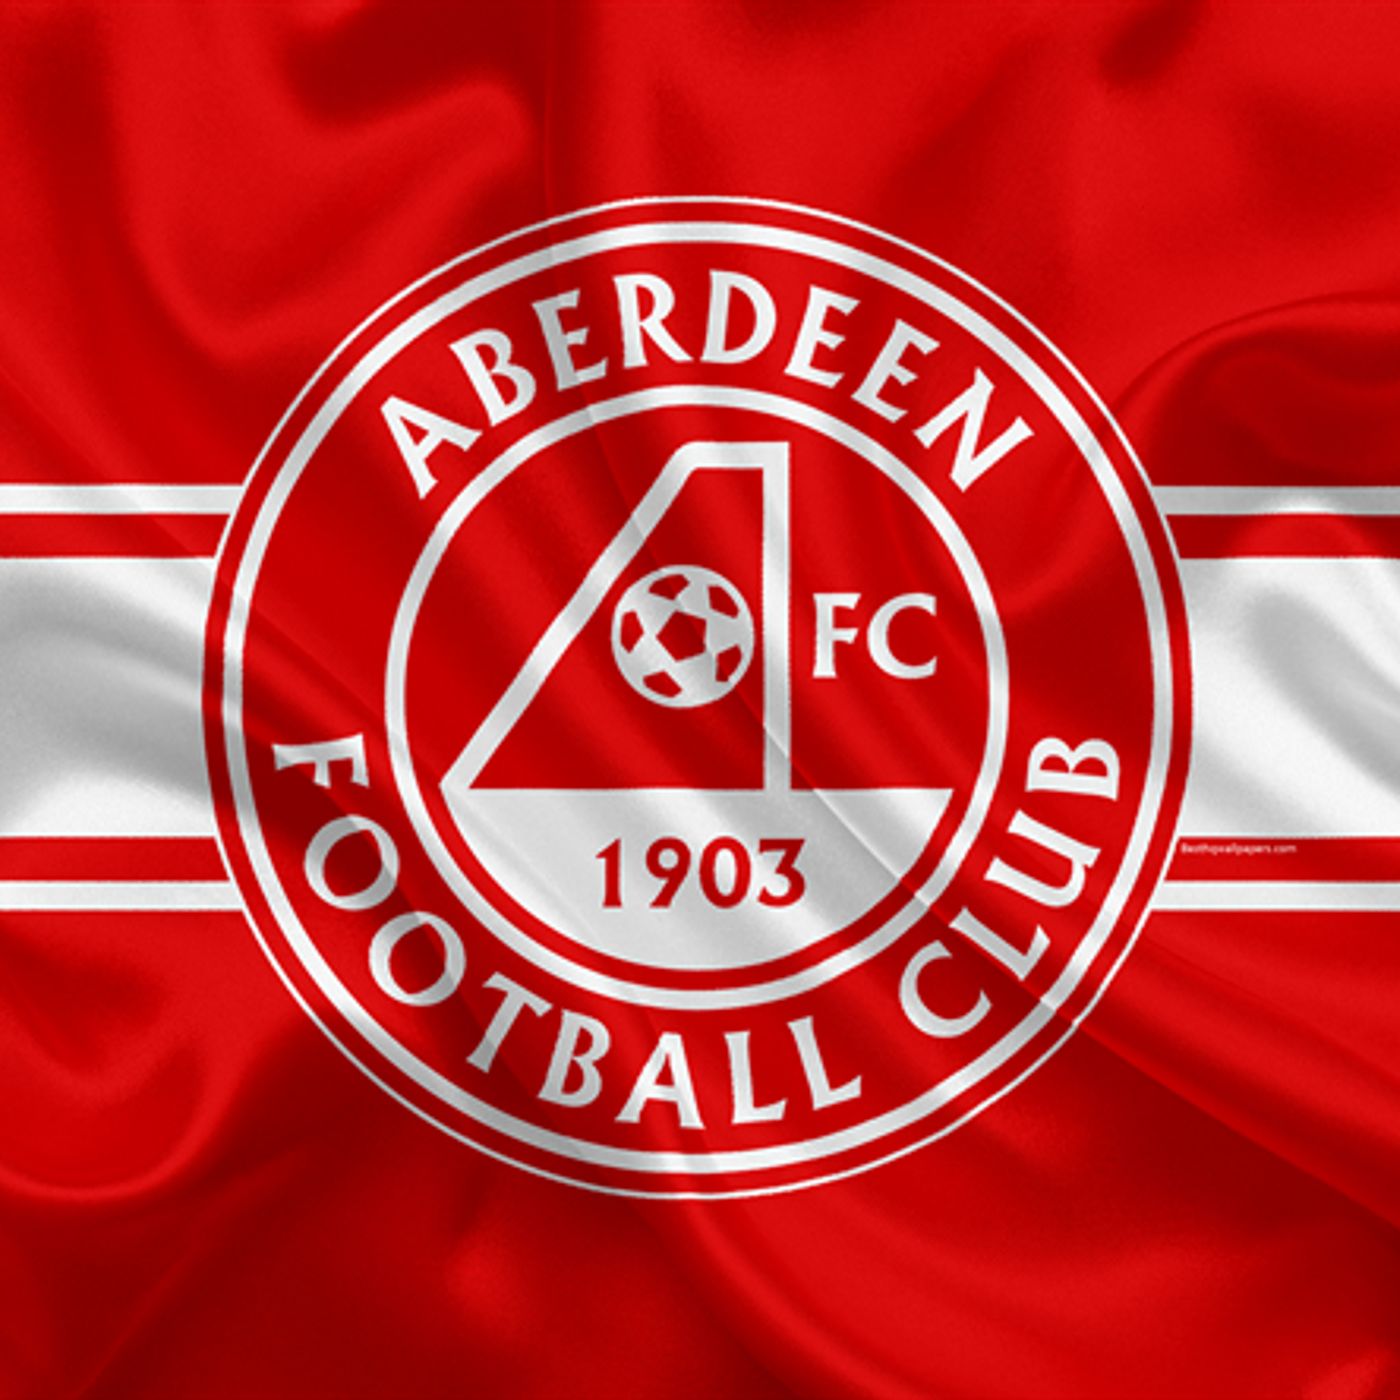 Seven Of The Best (7OTB) players to ever play for Aberdeen FC